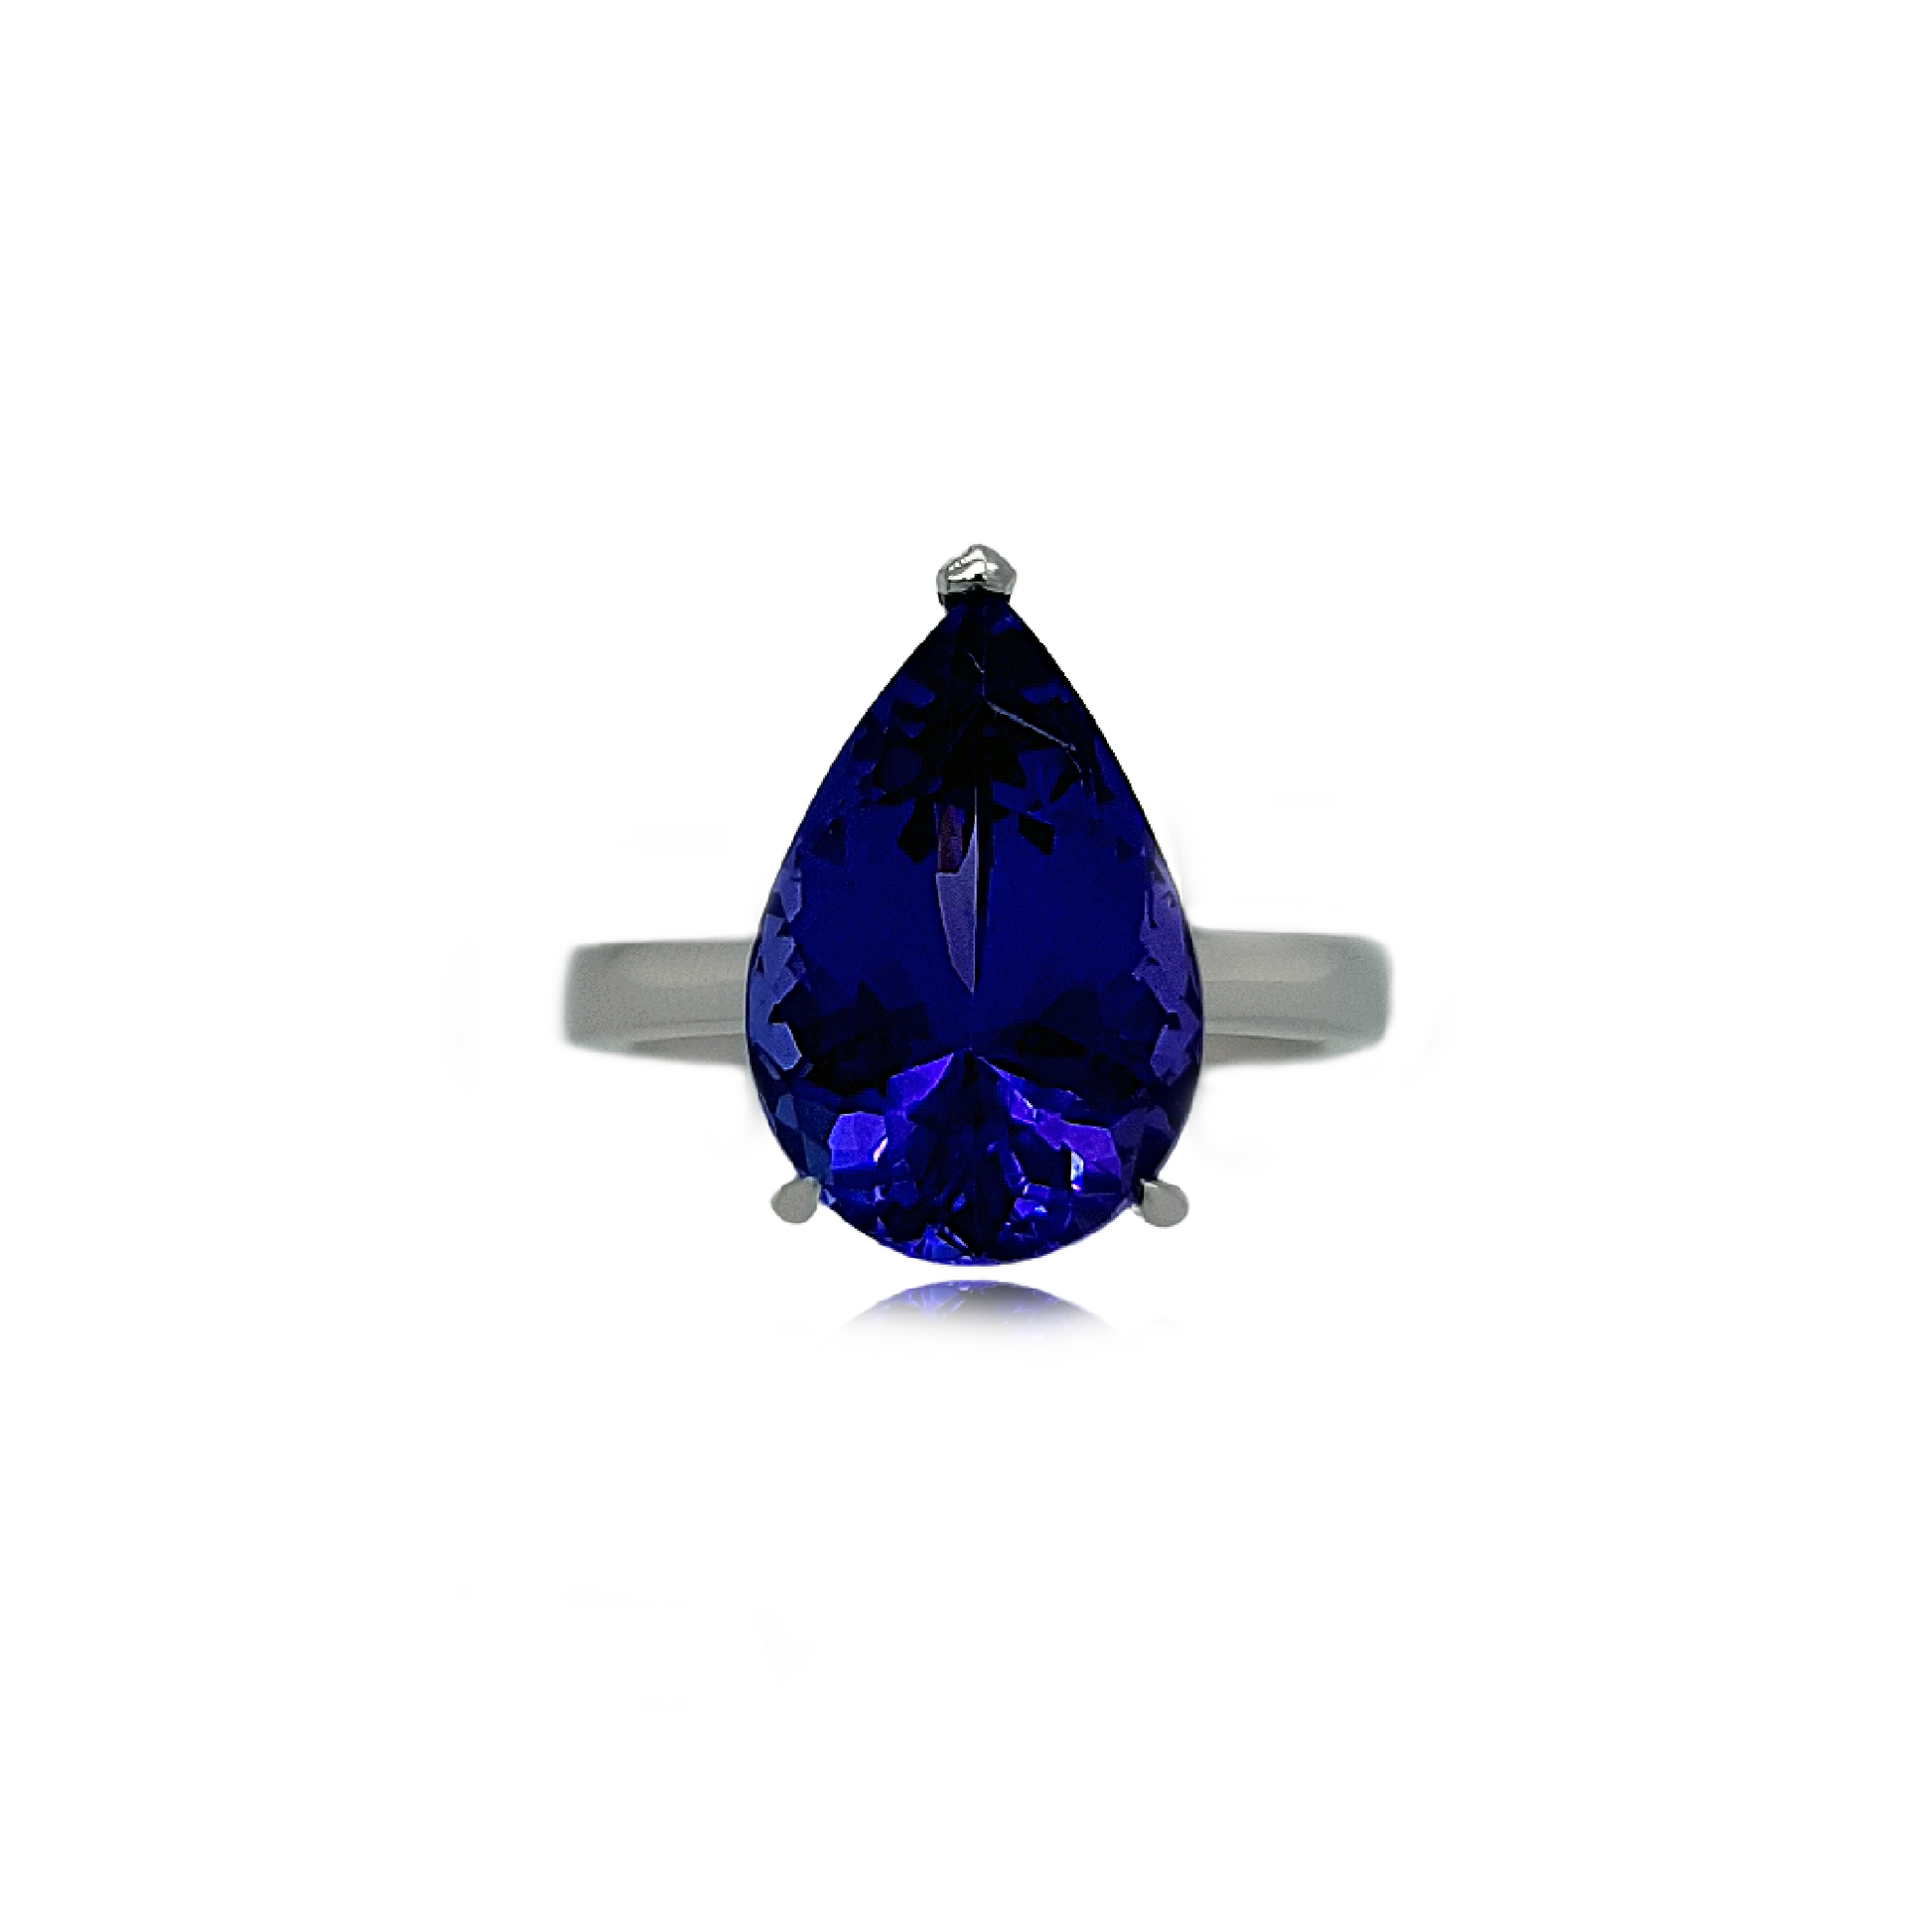 "Pear-shaped Tanzanite Engagement Ring in Solitaire Setting" "Elegant Tanzanite Ring with Pear-cut Gemstone" "Classic Pear Tanzanite Solitaire Ring" "Exquisite Pear Tanzanite Engagement Ring" "Simple and Stunning Tanzanite Solitaire in Pear Shape" "Single Stone Pear Tanzanite Ring" "Timeless Pear-Cut Tanzanite Engagement Ring"